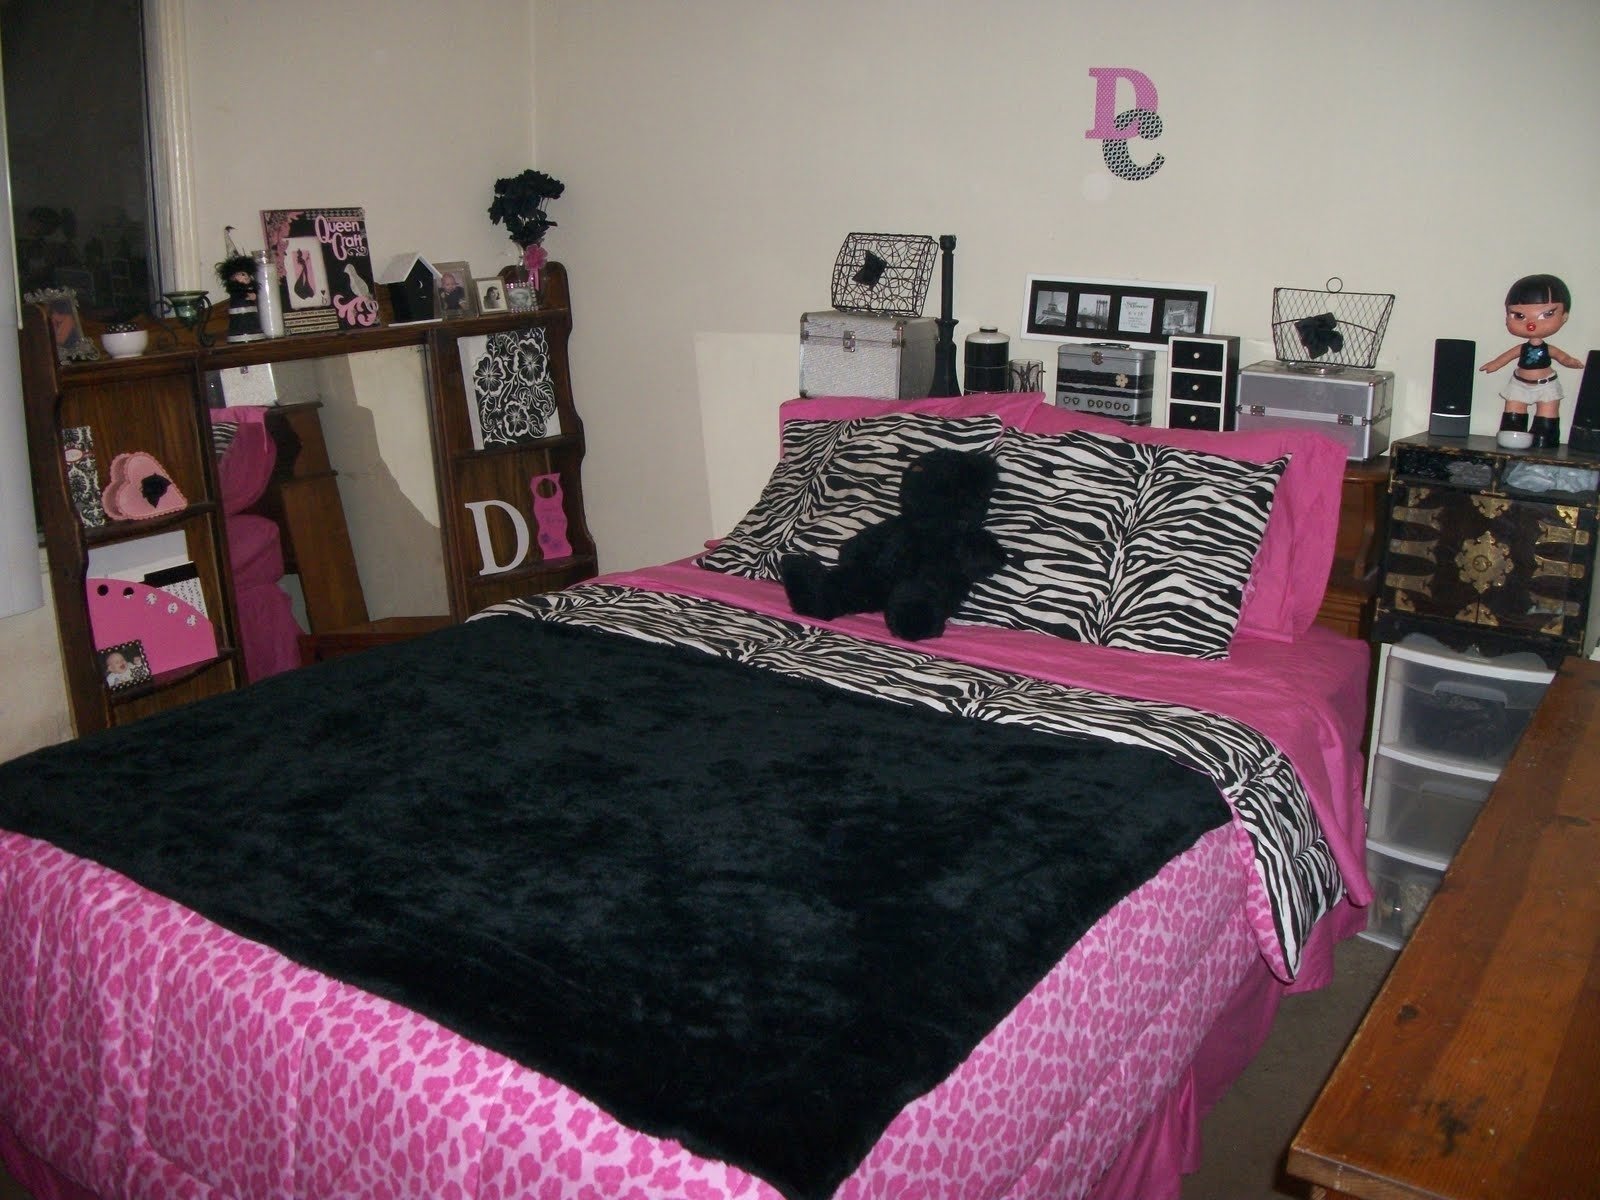 10 Most Recommended Pink Black And White Room Ideas pink black and white bedroom decor e280a2 white bedroom ideas 2022